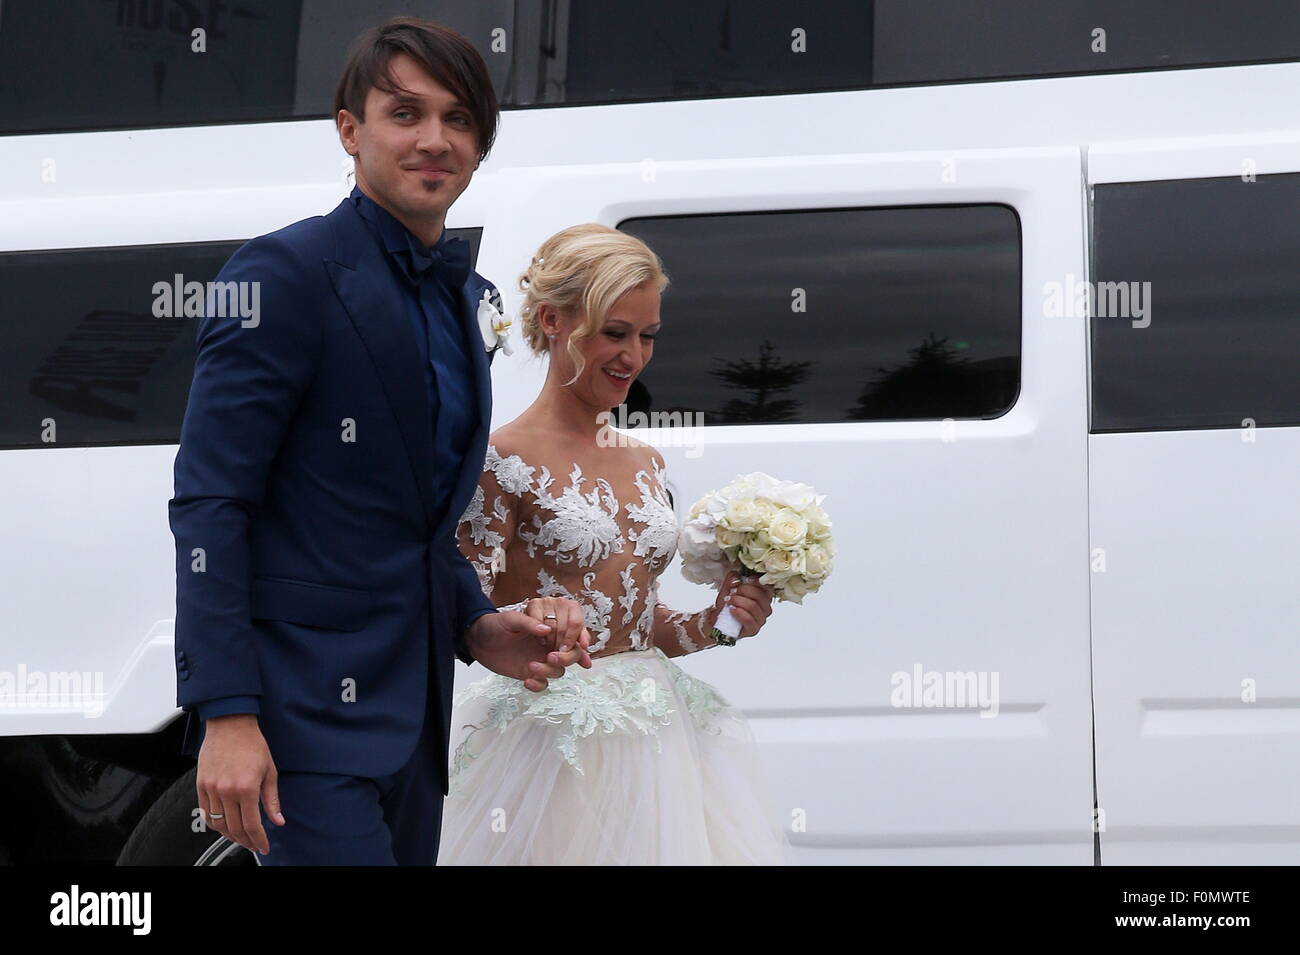 Moscow, Russia. 18th Aug, 2015. Two-time Olympic figure skating champions Maxim Trankov (L) and Tatiana Volosozhar during their wedding at the Rose Bar restaurant. Credit:  Vyacheslav Prokofyev/TASS/Alamy Live News Stock Photo